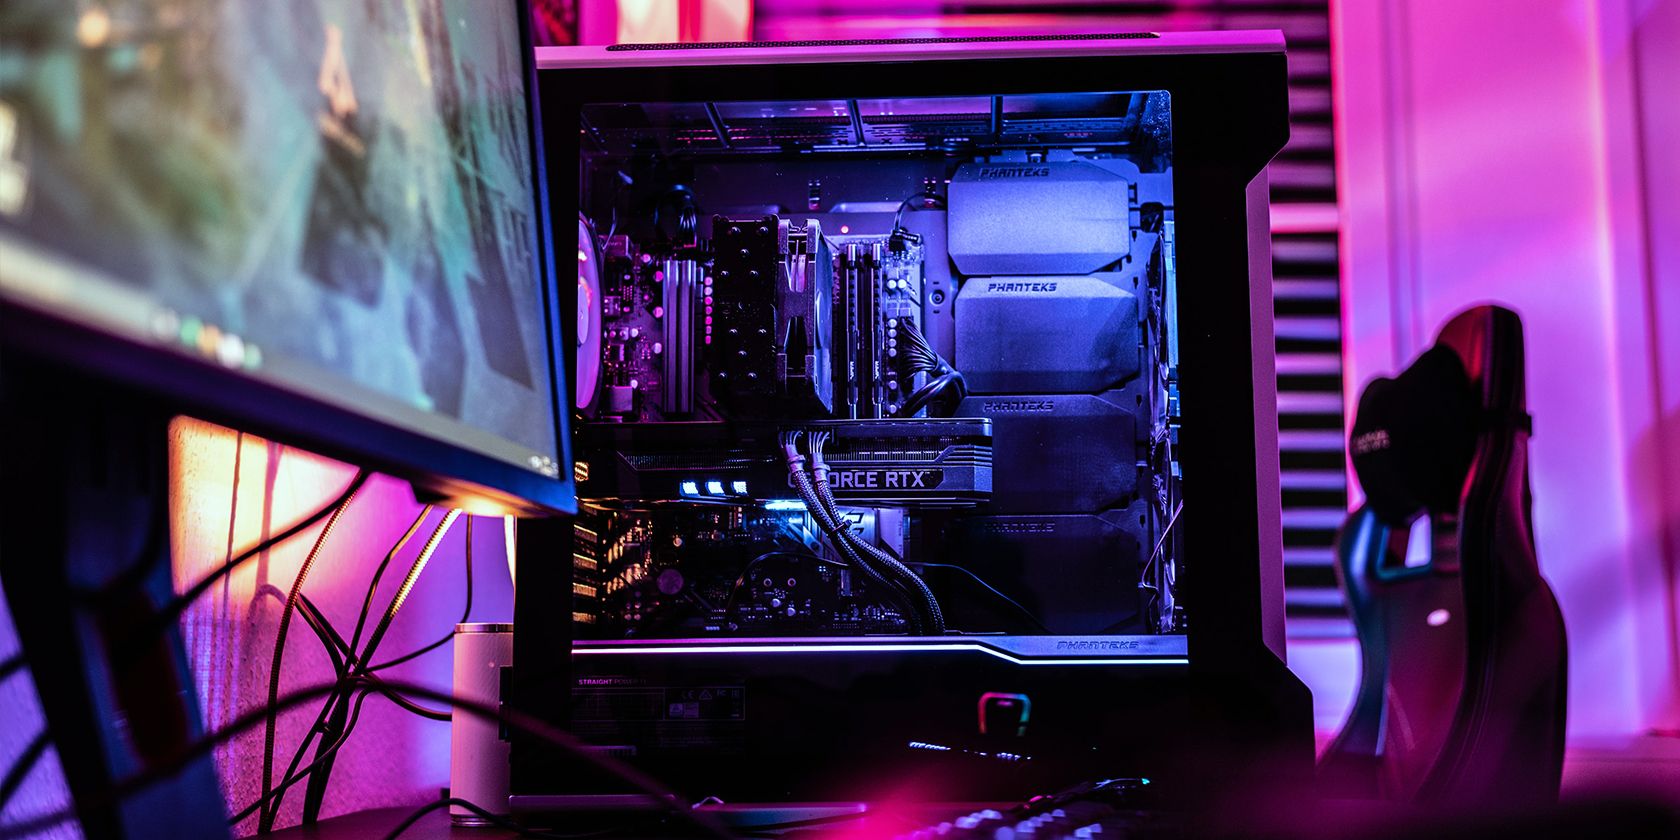 assembled and custom-built gaming PC